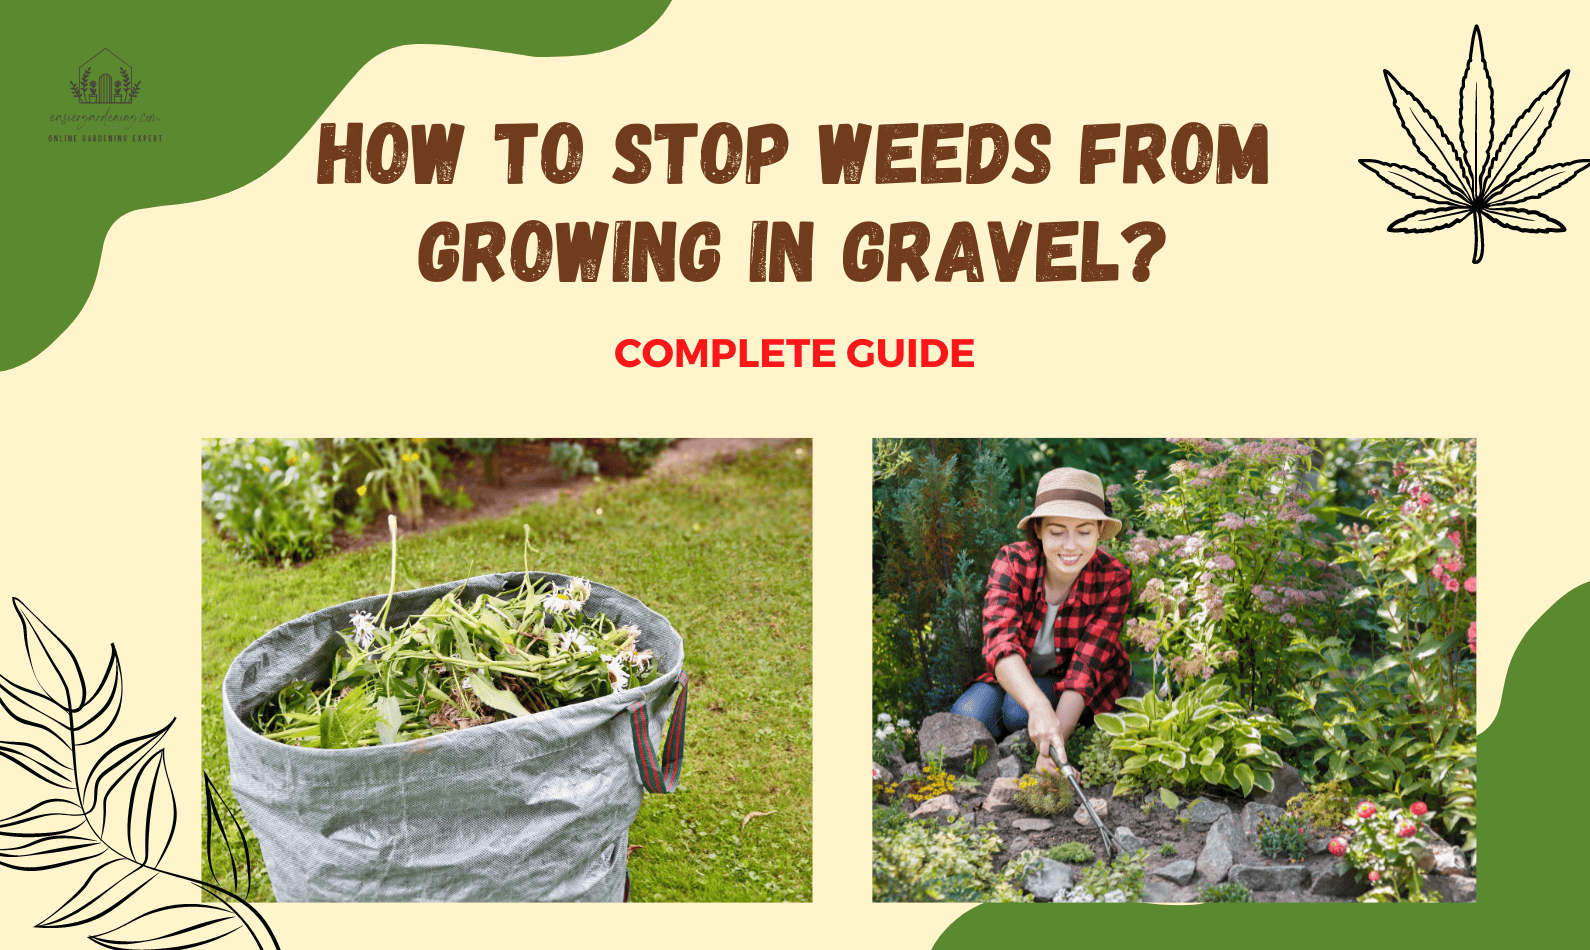 How to Stop Weeds from Growing in Gravel?